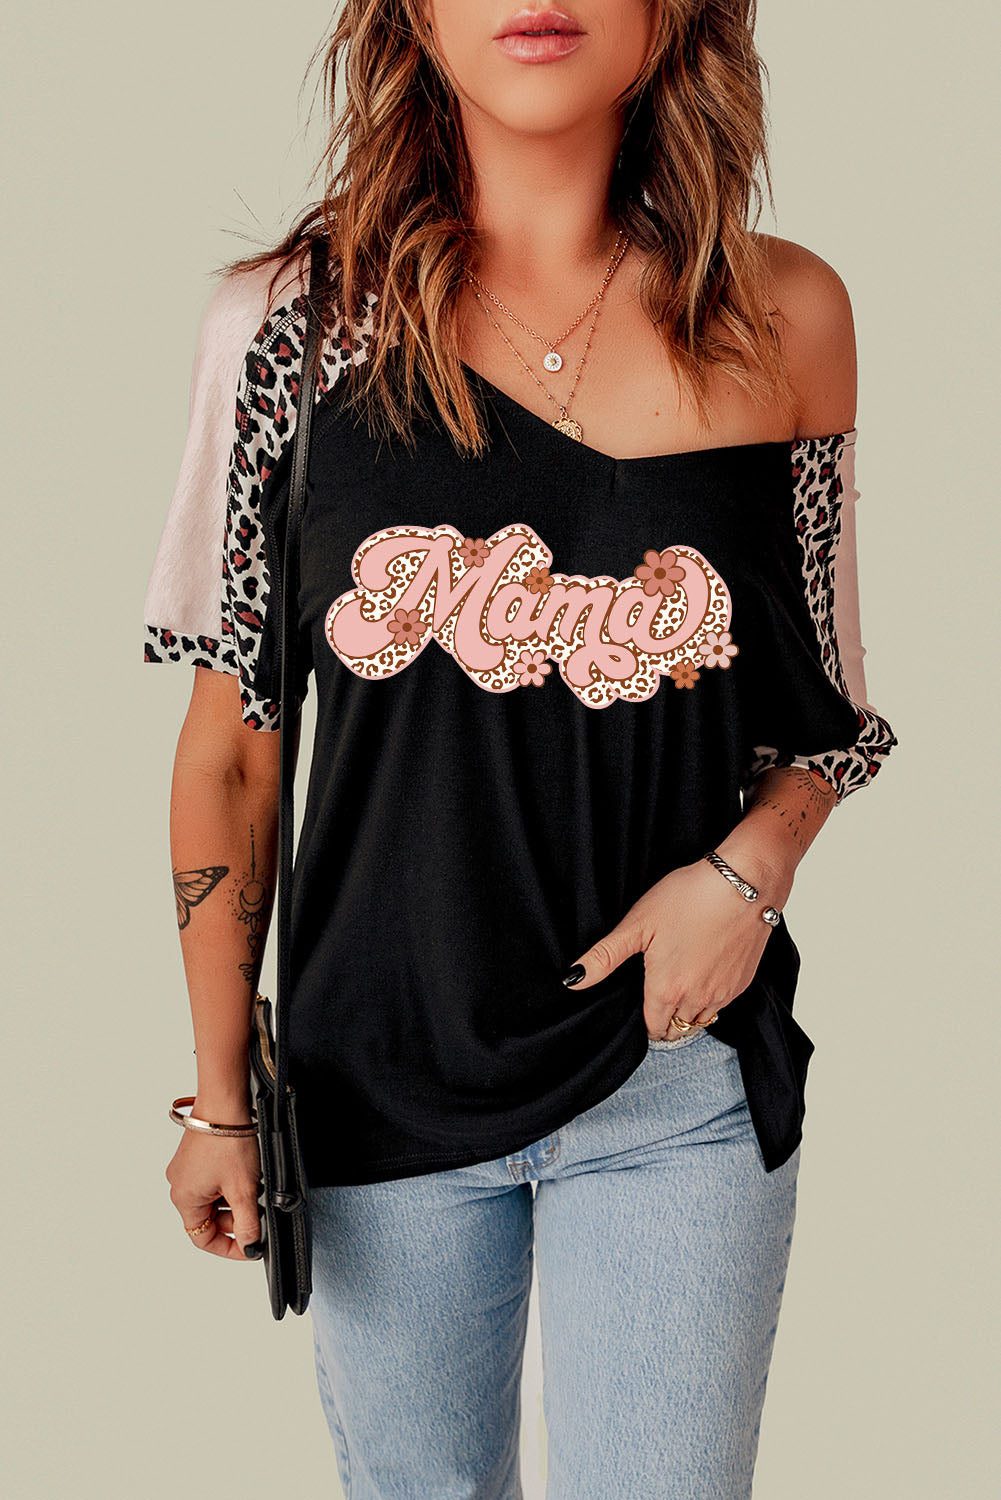 MAMA Graphic Leopard V-Neck Tee Shirt - Kawaii Stop - Casual and Chic, Comfortable, Easy Care, Everyday Wear, Leopard Print, MAMA Graphic Tee, Mom Fashion, Motherhood Celebration, No Sheer, Ship From Overseas, Size Guide, Stylish Apparel, Stylish Mom, SYNZ, T-Shirt, T-Shirts, Tee, Unique Design, V-Neck T-Shirt, Women's Clothing, Women's Top